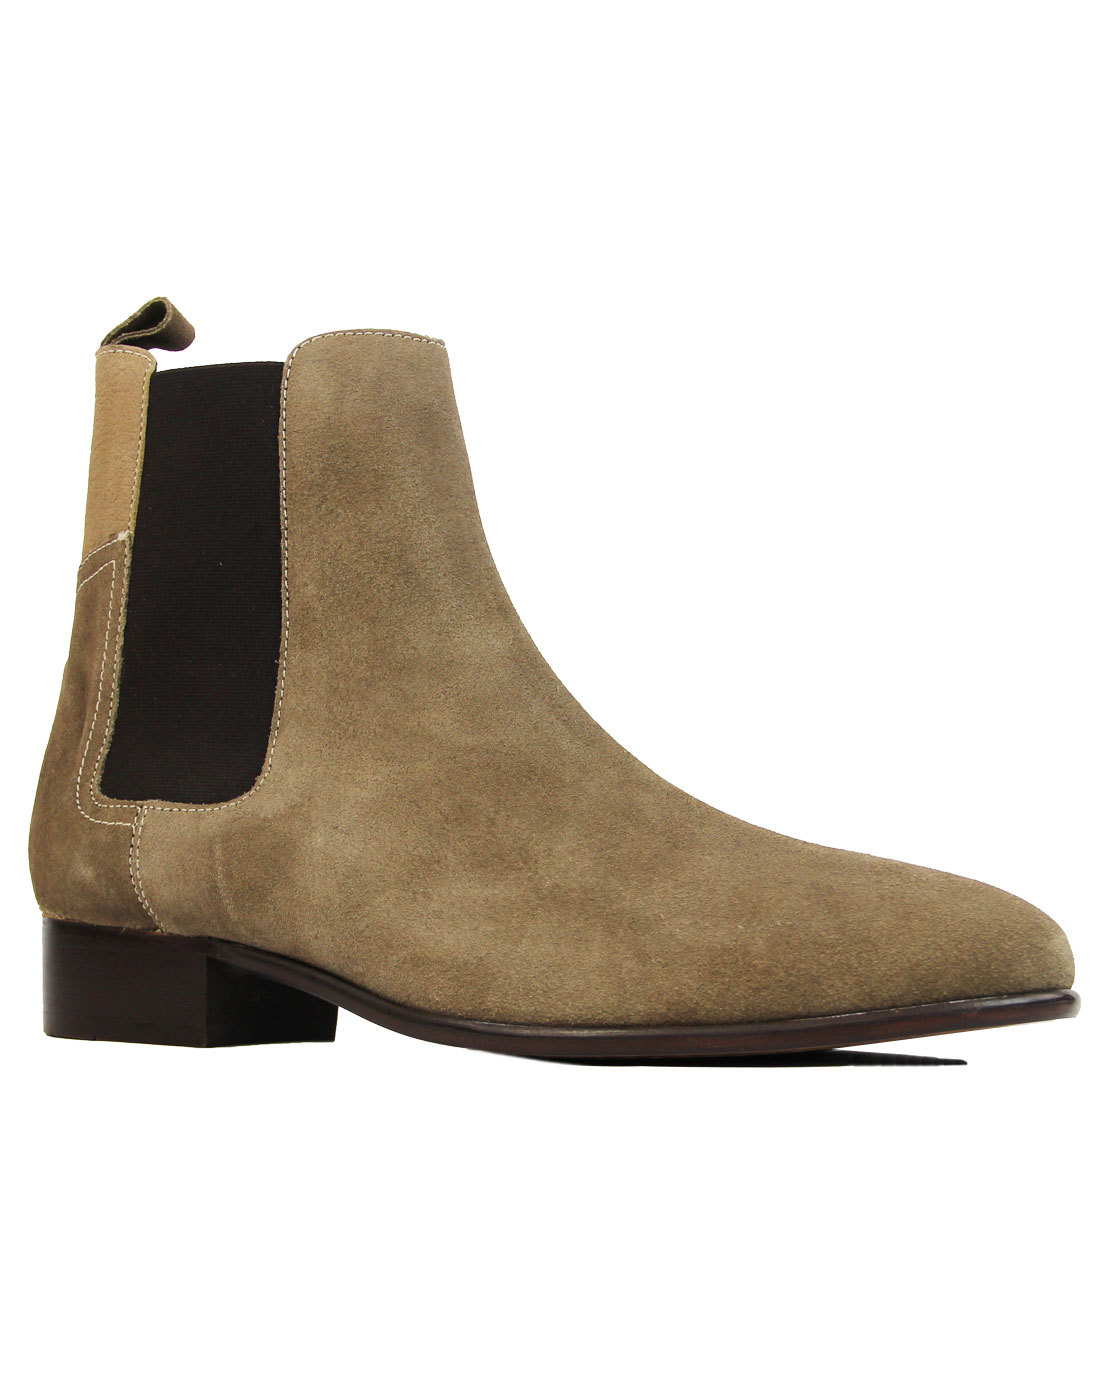 H by HUDSON Watts Rtero Mod Cuban Heel Taupe Suede Chelsea Boots